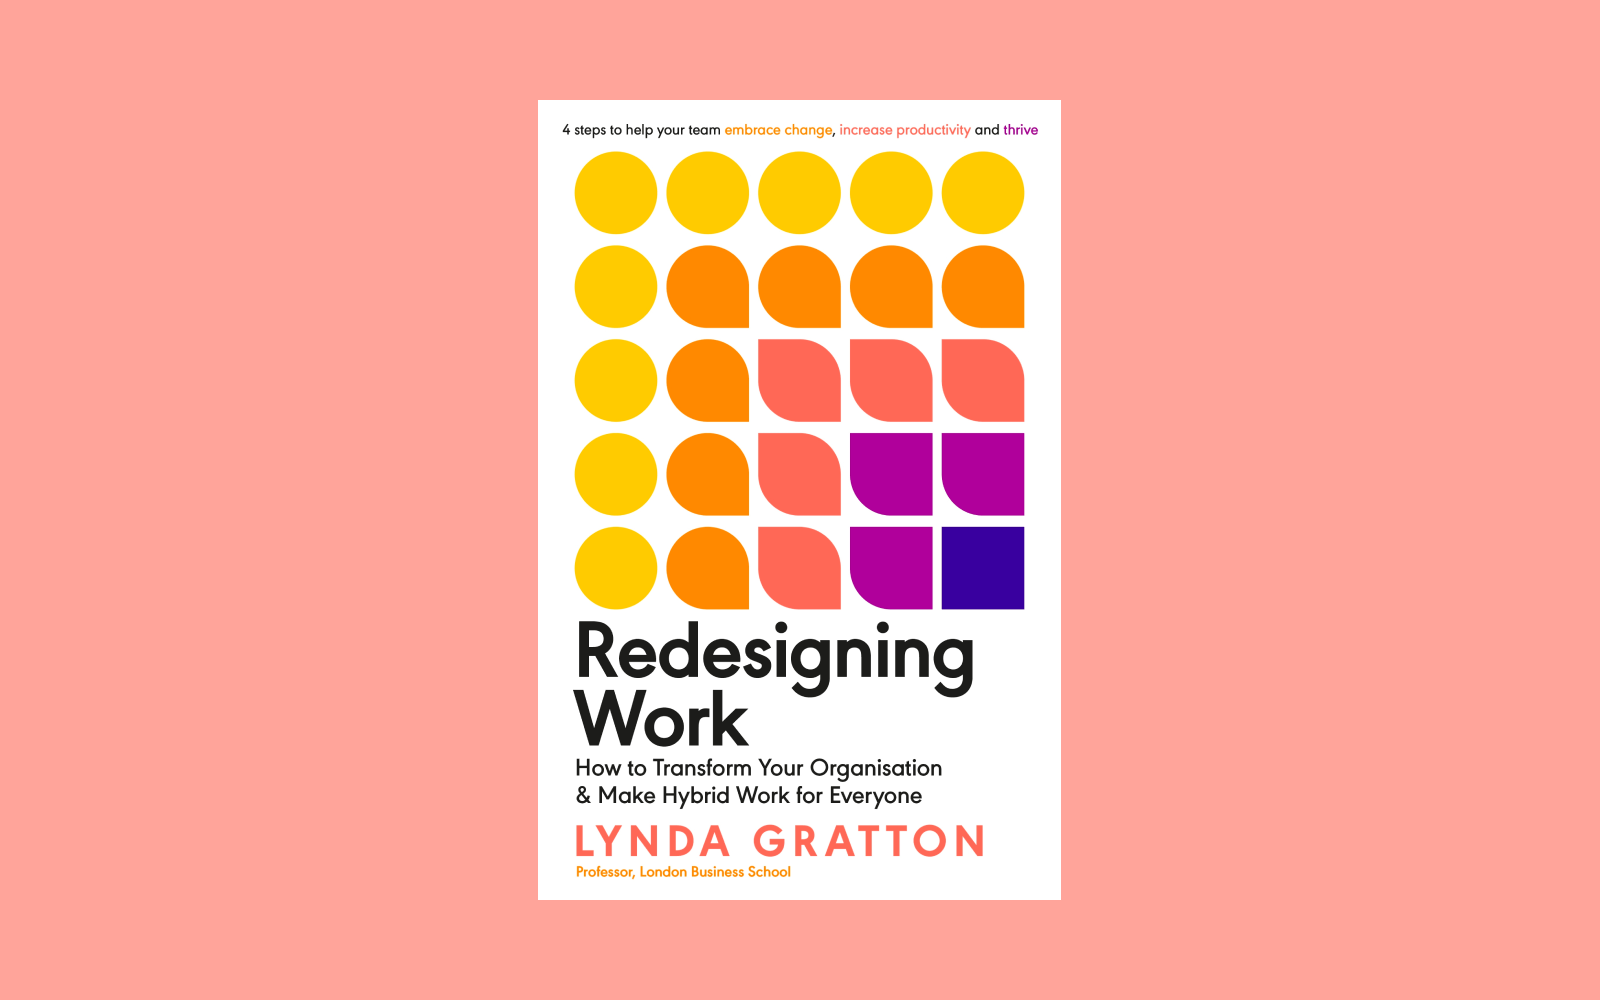 Redesigning Work book cover by Lynda Gratton